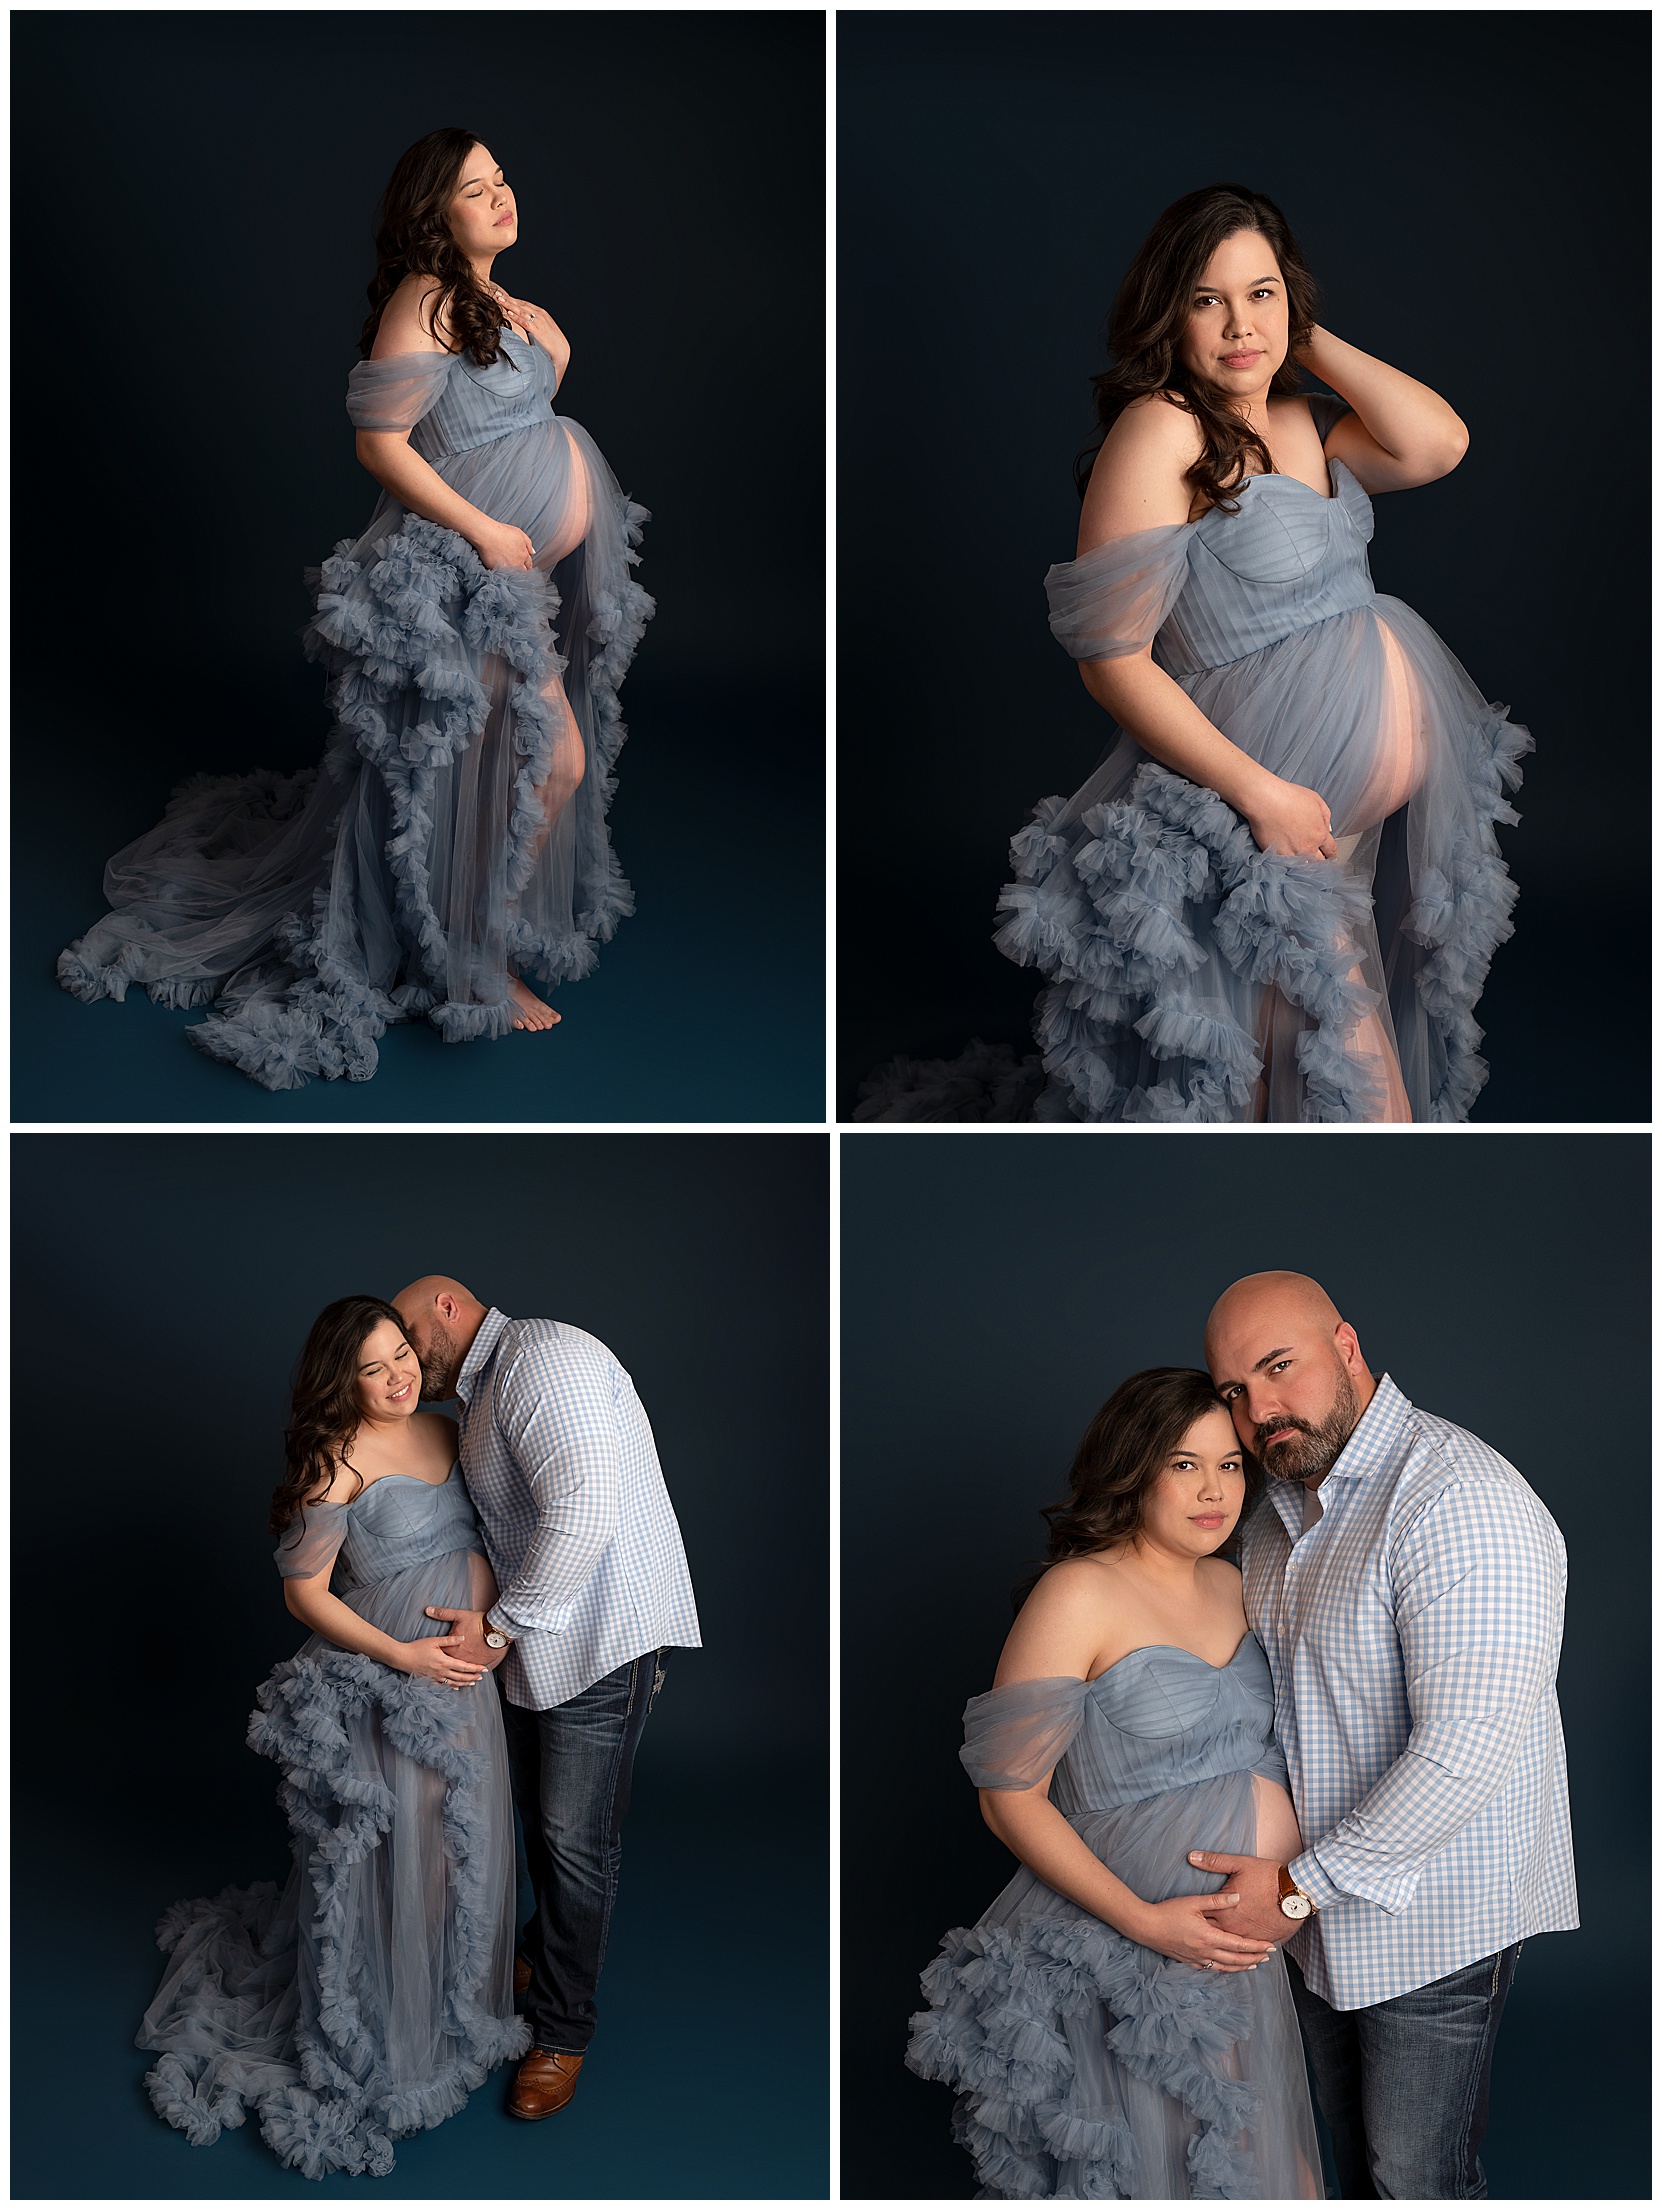 Collage of four unique maternity photos. Top two photos feature a pregnant woman posed to highlight her baby bump. Bottom two photos feature the same woman and her male partner. 